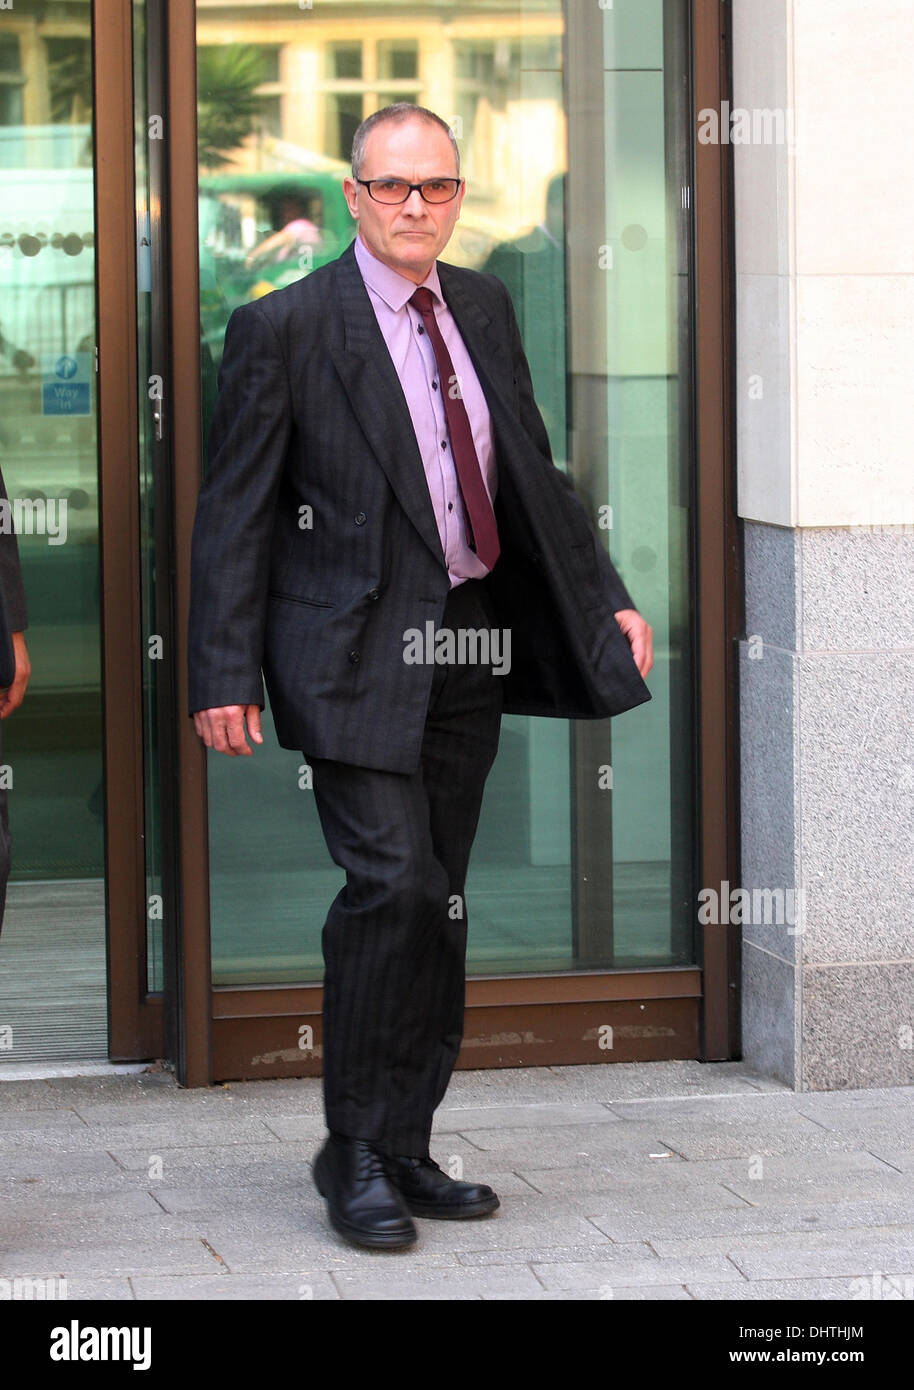 PC Alex MacFarlane leaves Westminster Magistrates' Court in London, England on 22 May, 2012. MacFarlane was charged with racially abusing a suspect after the 2011 summer riots in London, a charge which he denied in court as he entered a not guilty plea. He was released on bail and is due appear at Southwark Crown Court on 29 June for a hearing  London, England - 22.05.12 Mandatory  Stock Photo